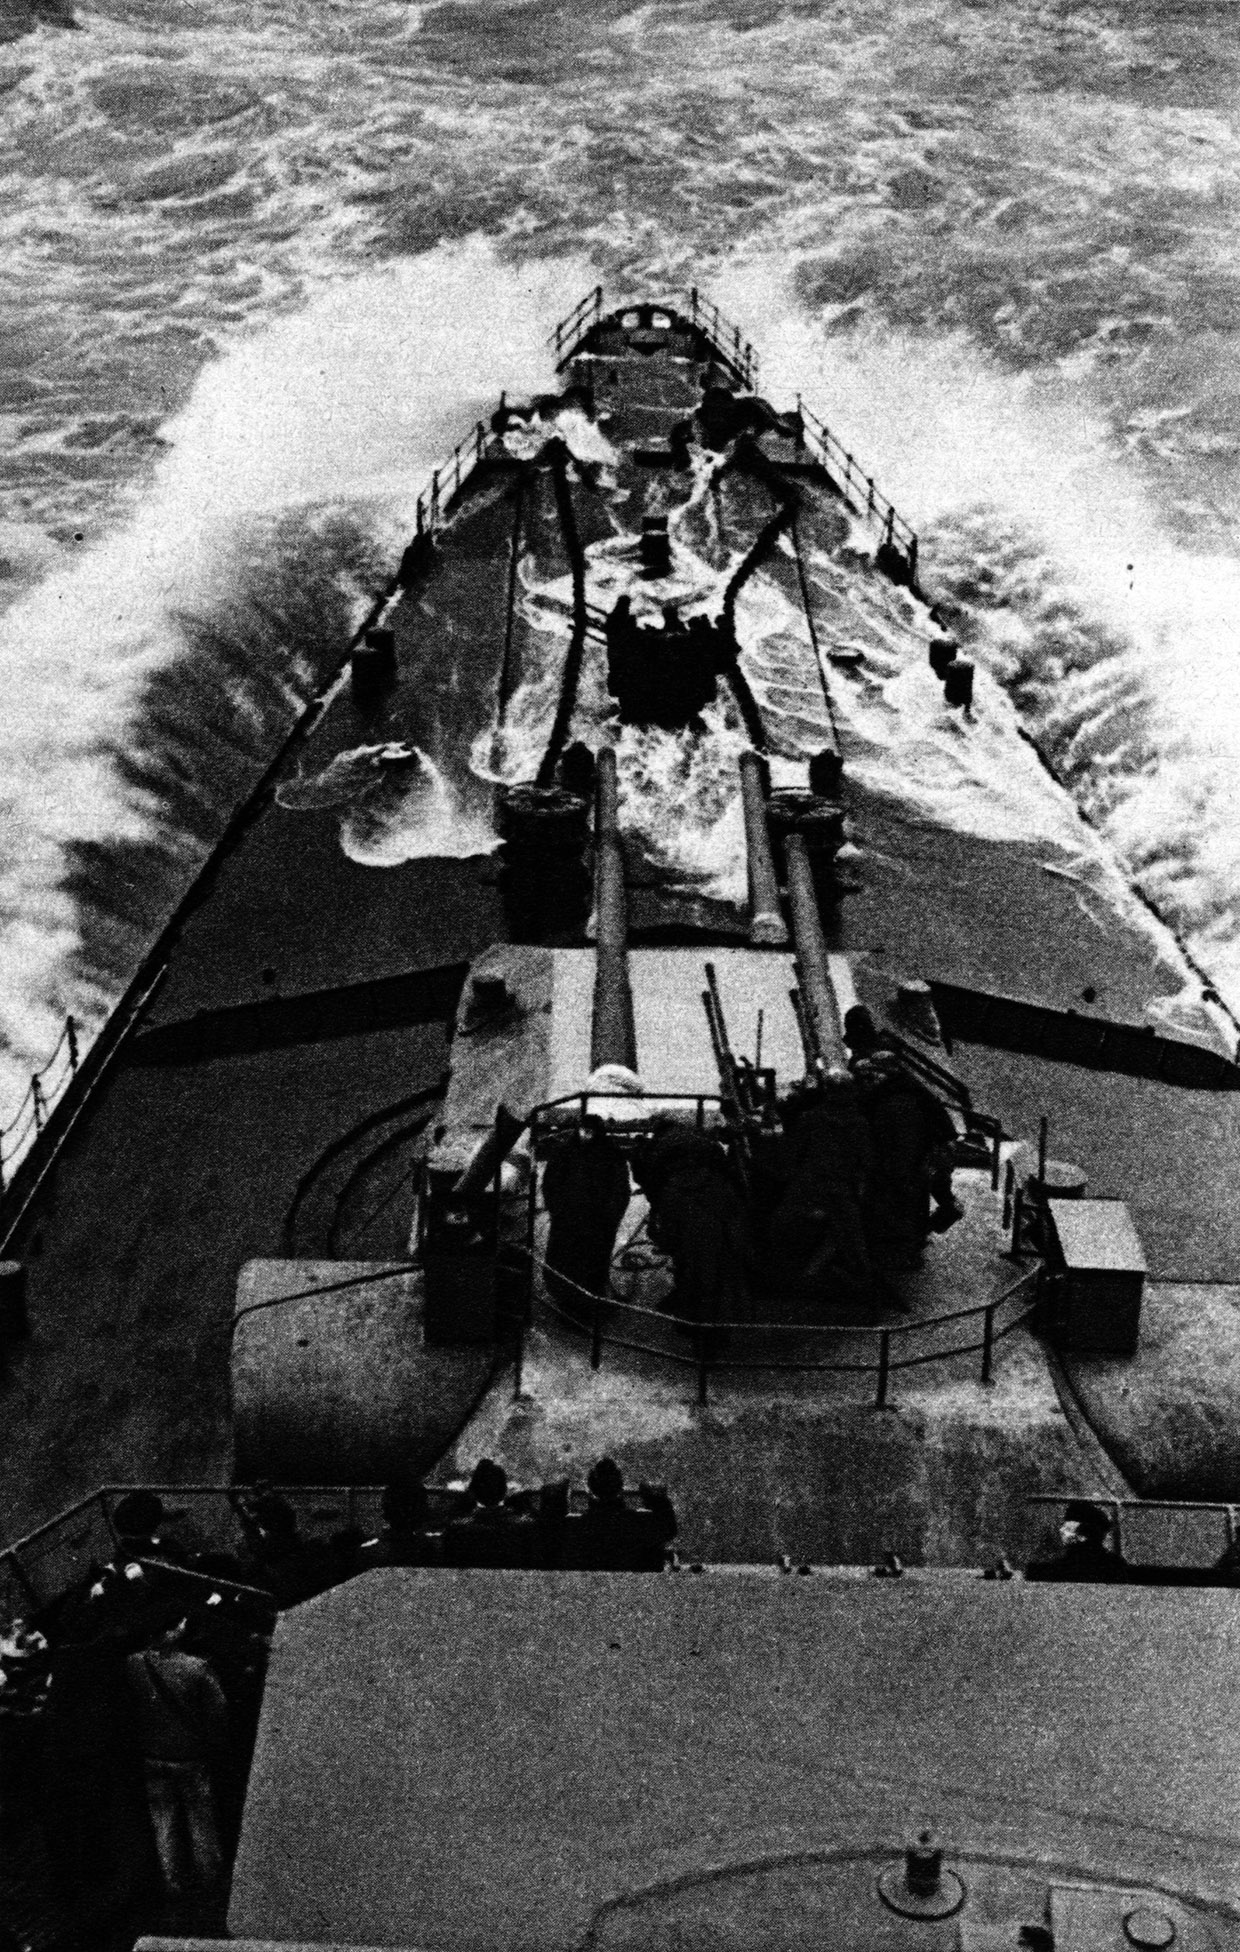 The Channel crashes over the bow of the Prinz Eugen